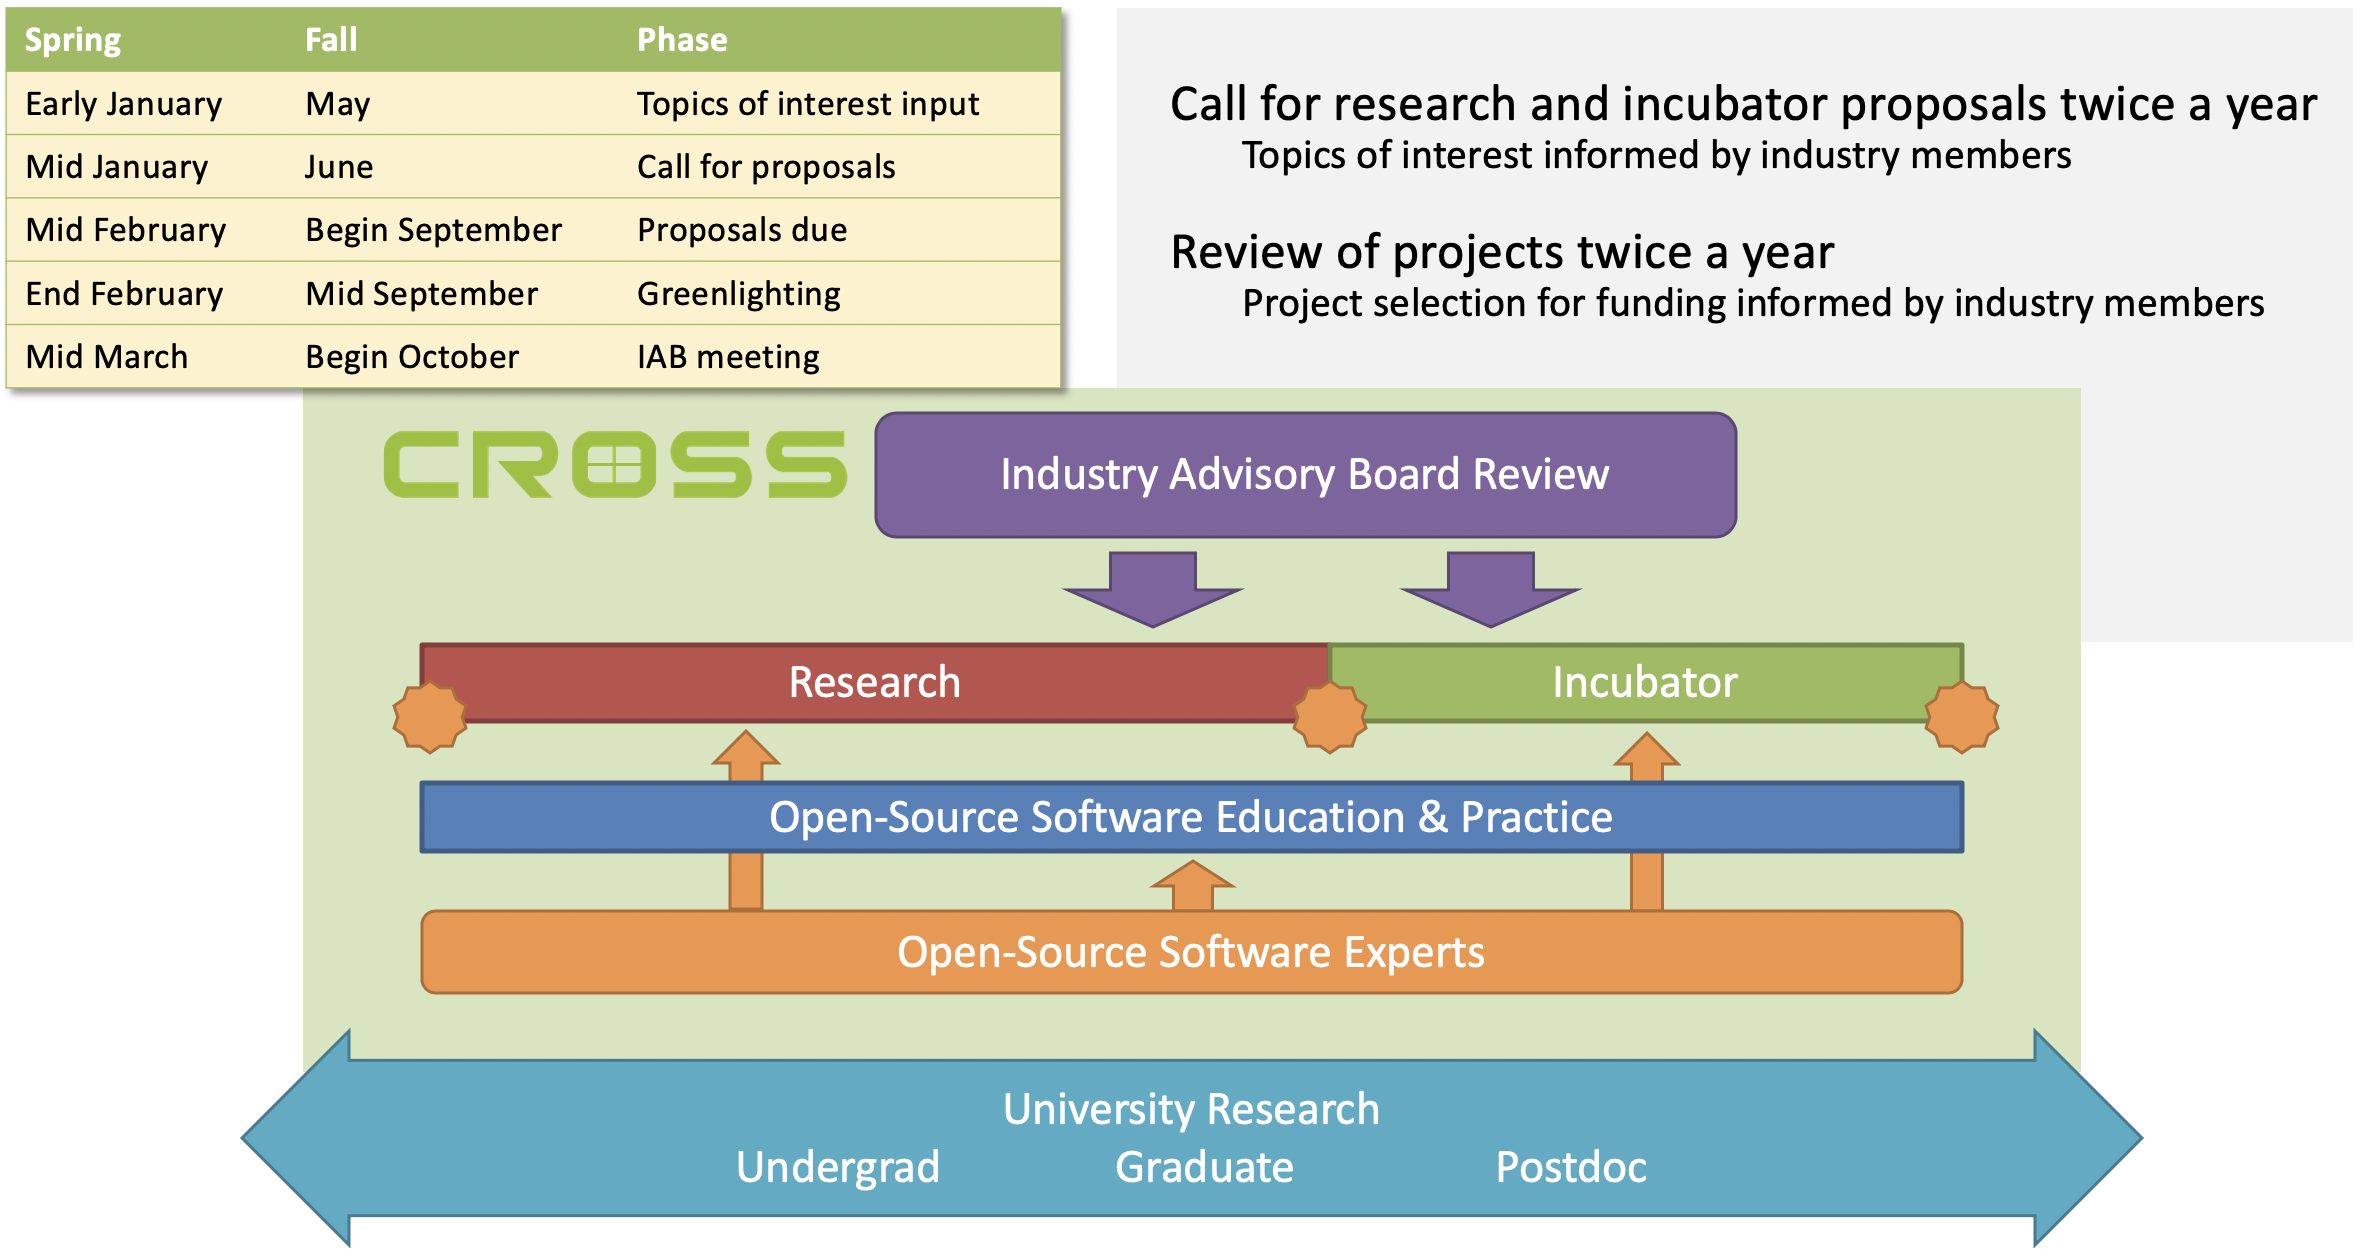 Call for research incubator proposals twice a year, review of projects twice a year